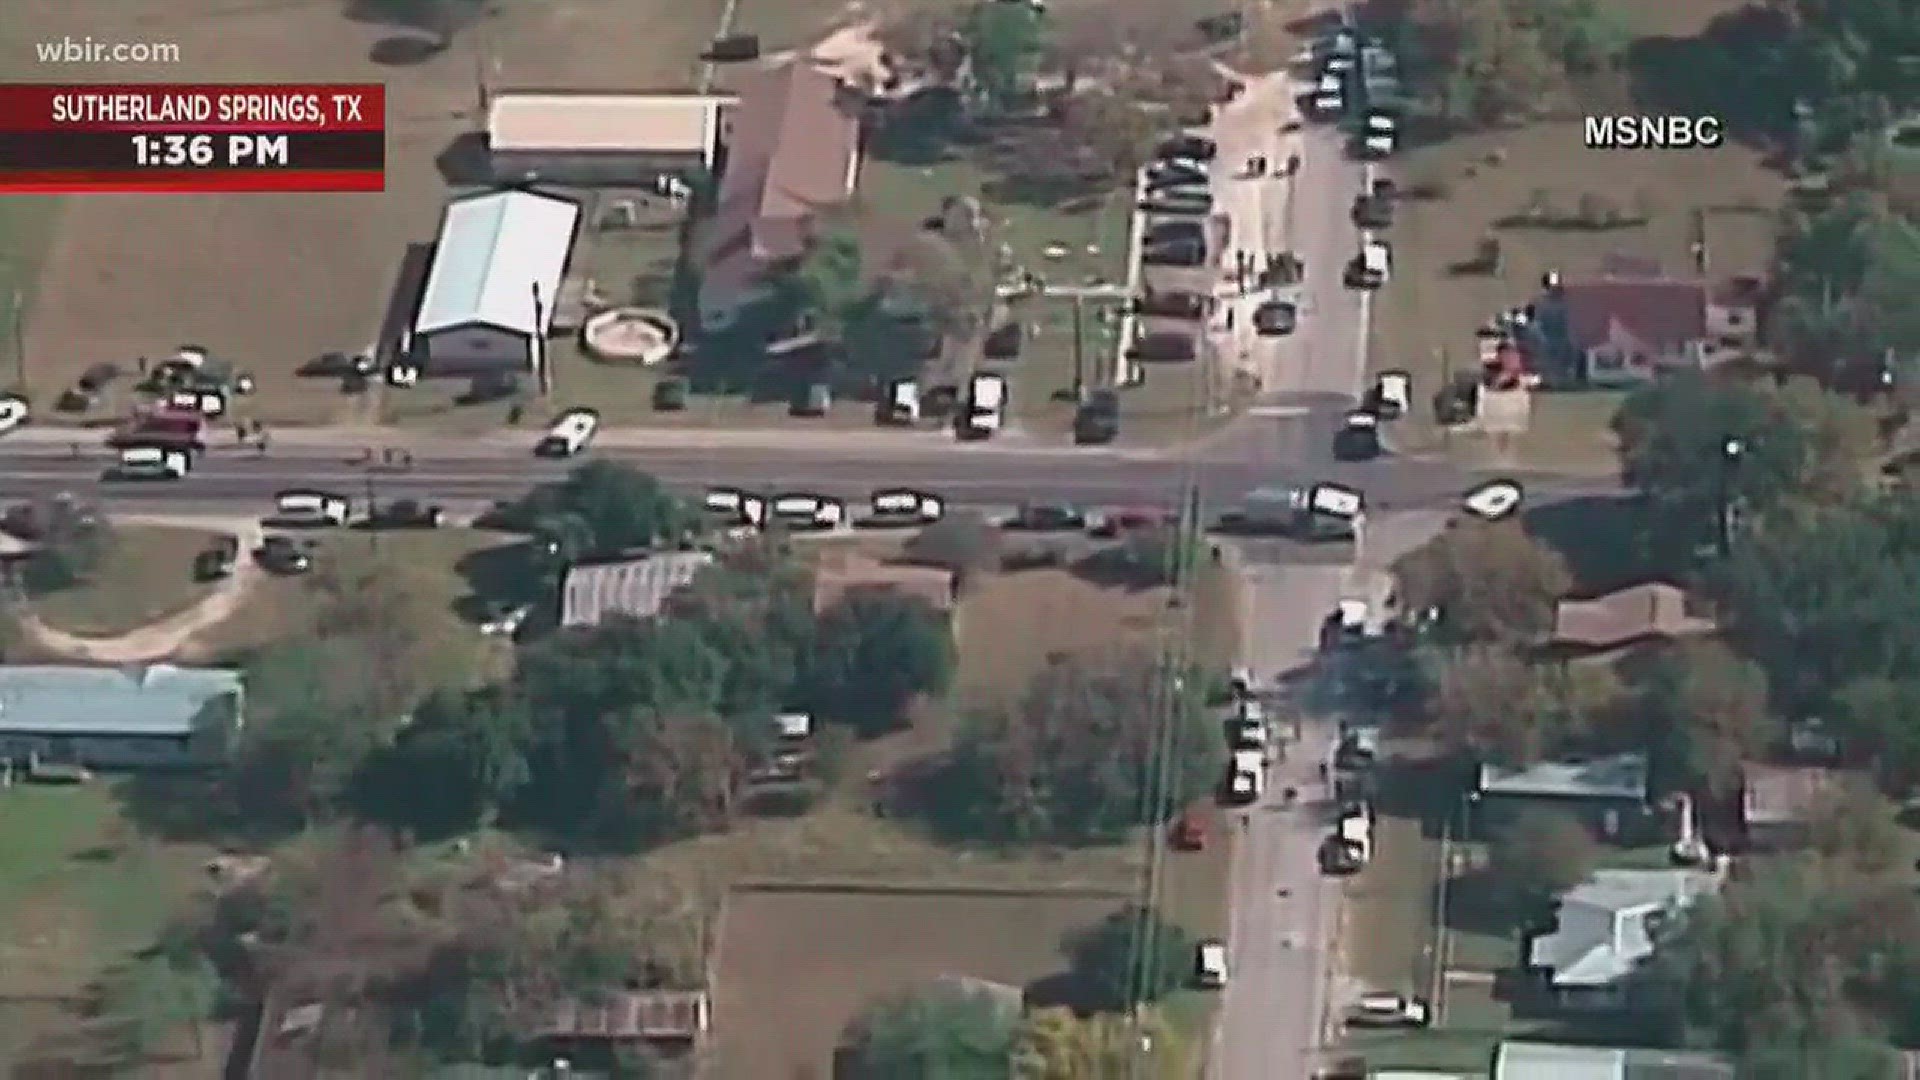 Authorities say there are more than 20 people dead after a shooting early Sunday in Sutherland Springs, Texas.